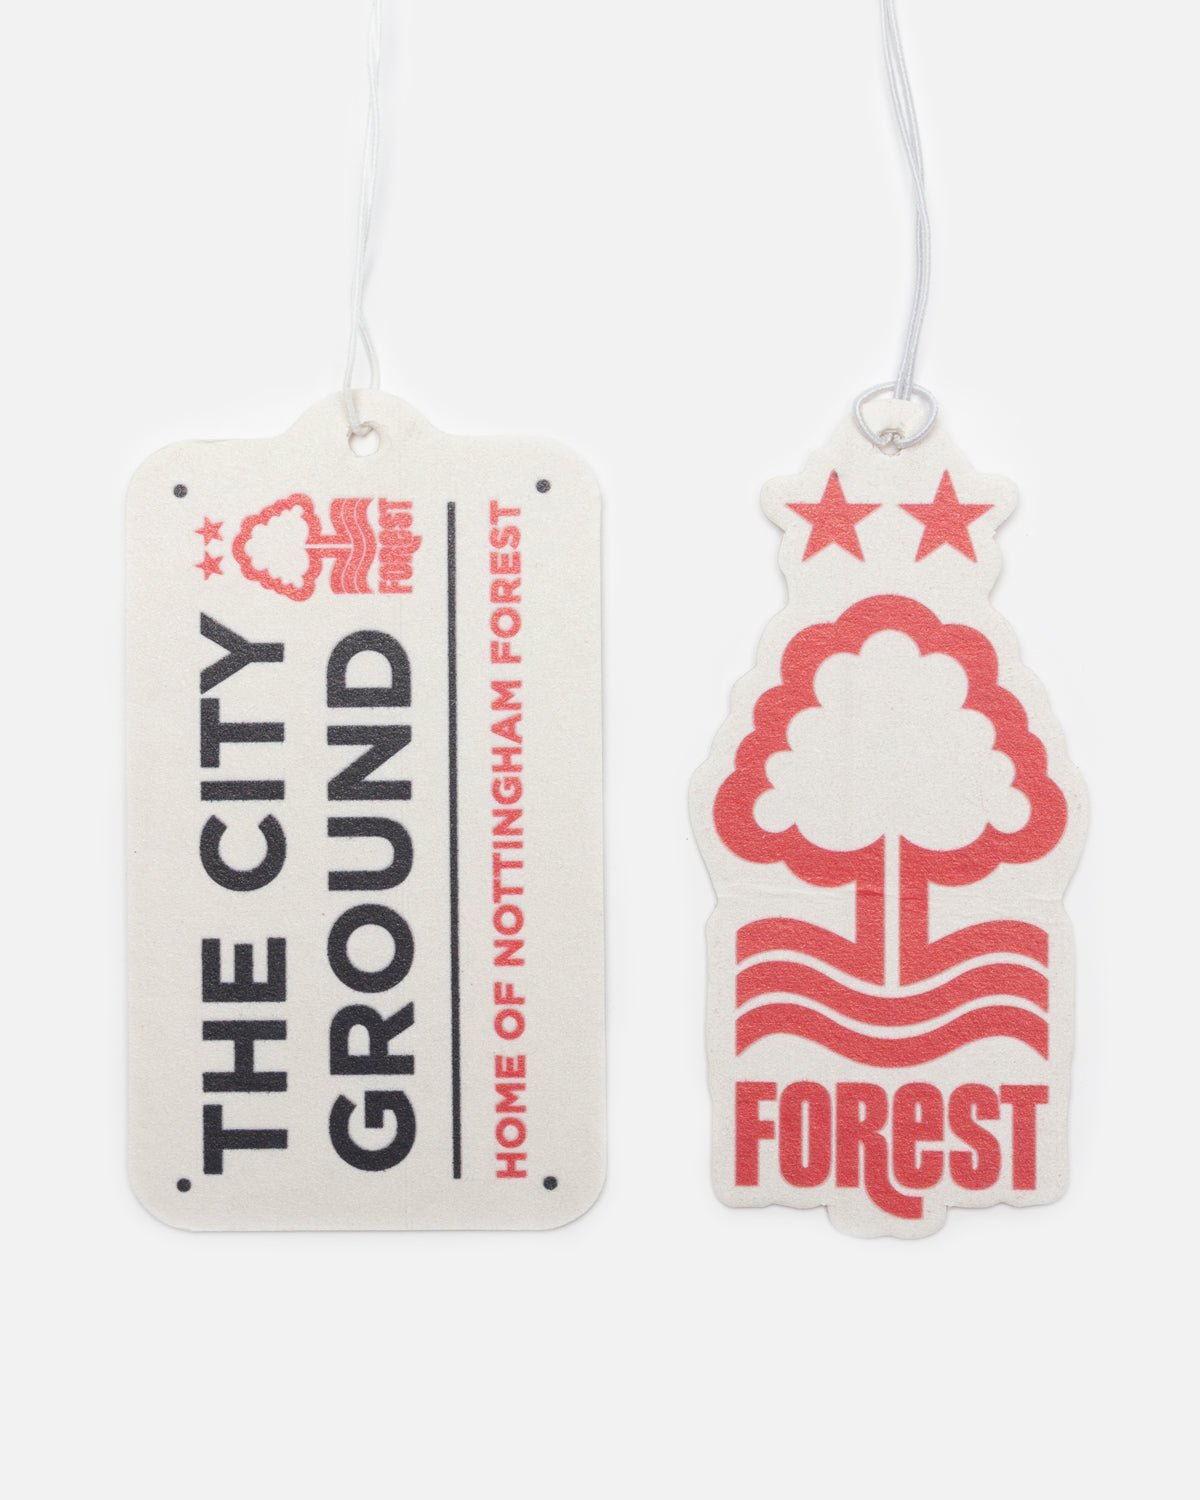 NFFC Double Air Freshener Pack - Nottingham Forest FC